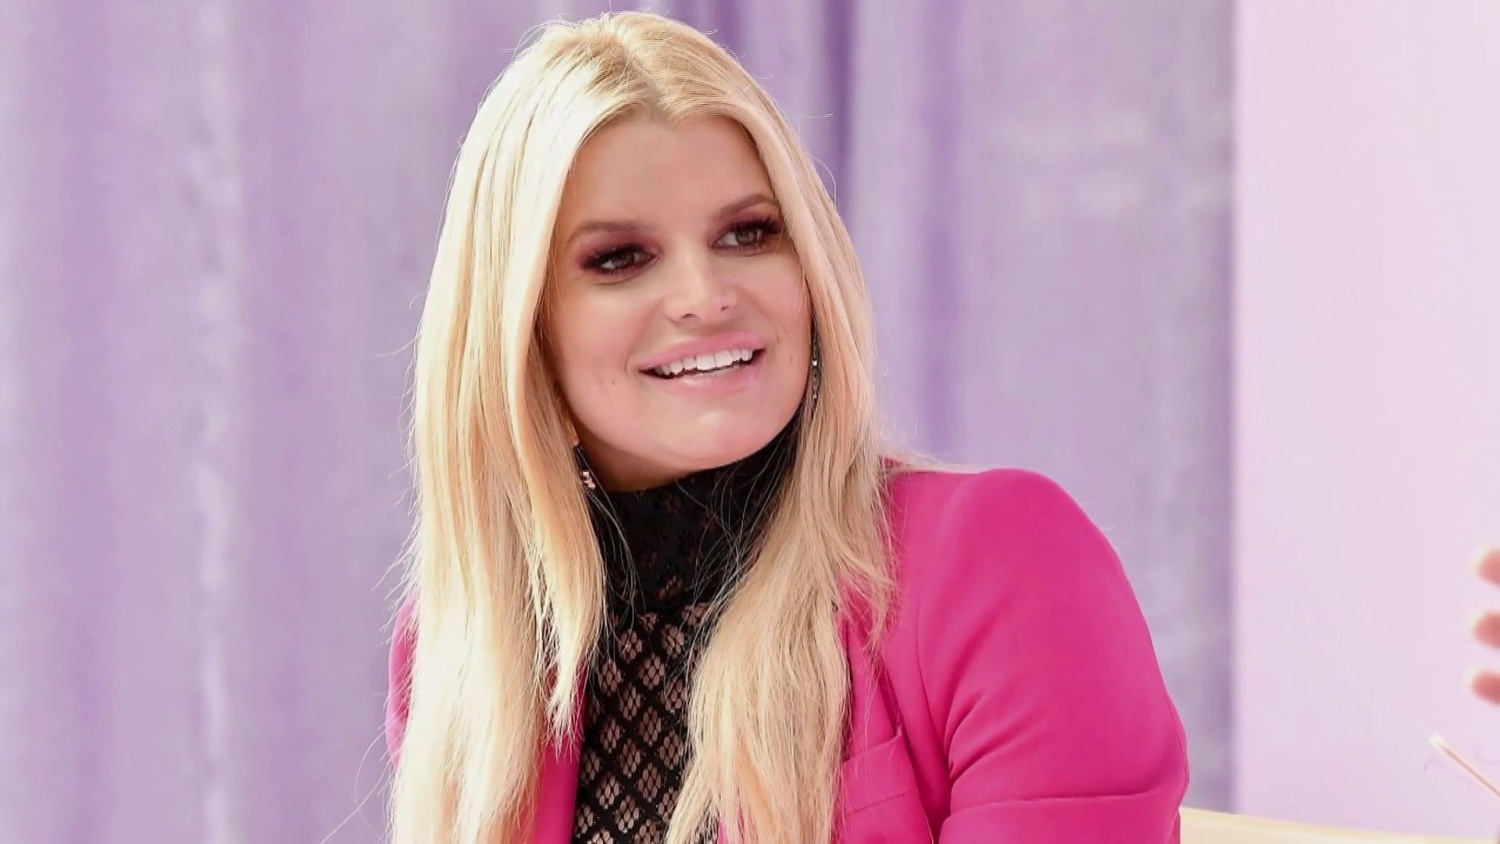 Jessica Simpson On Nick Lachey's Treatment Of Her on 'Newlyweds